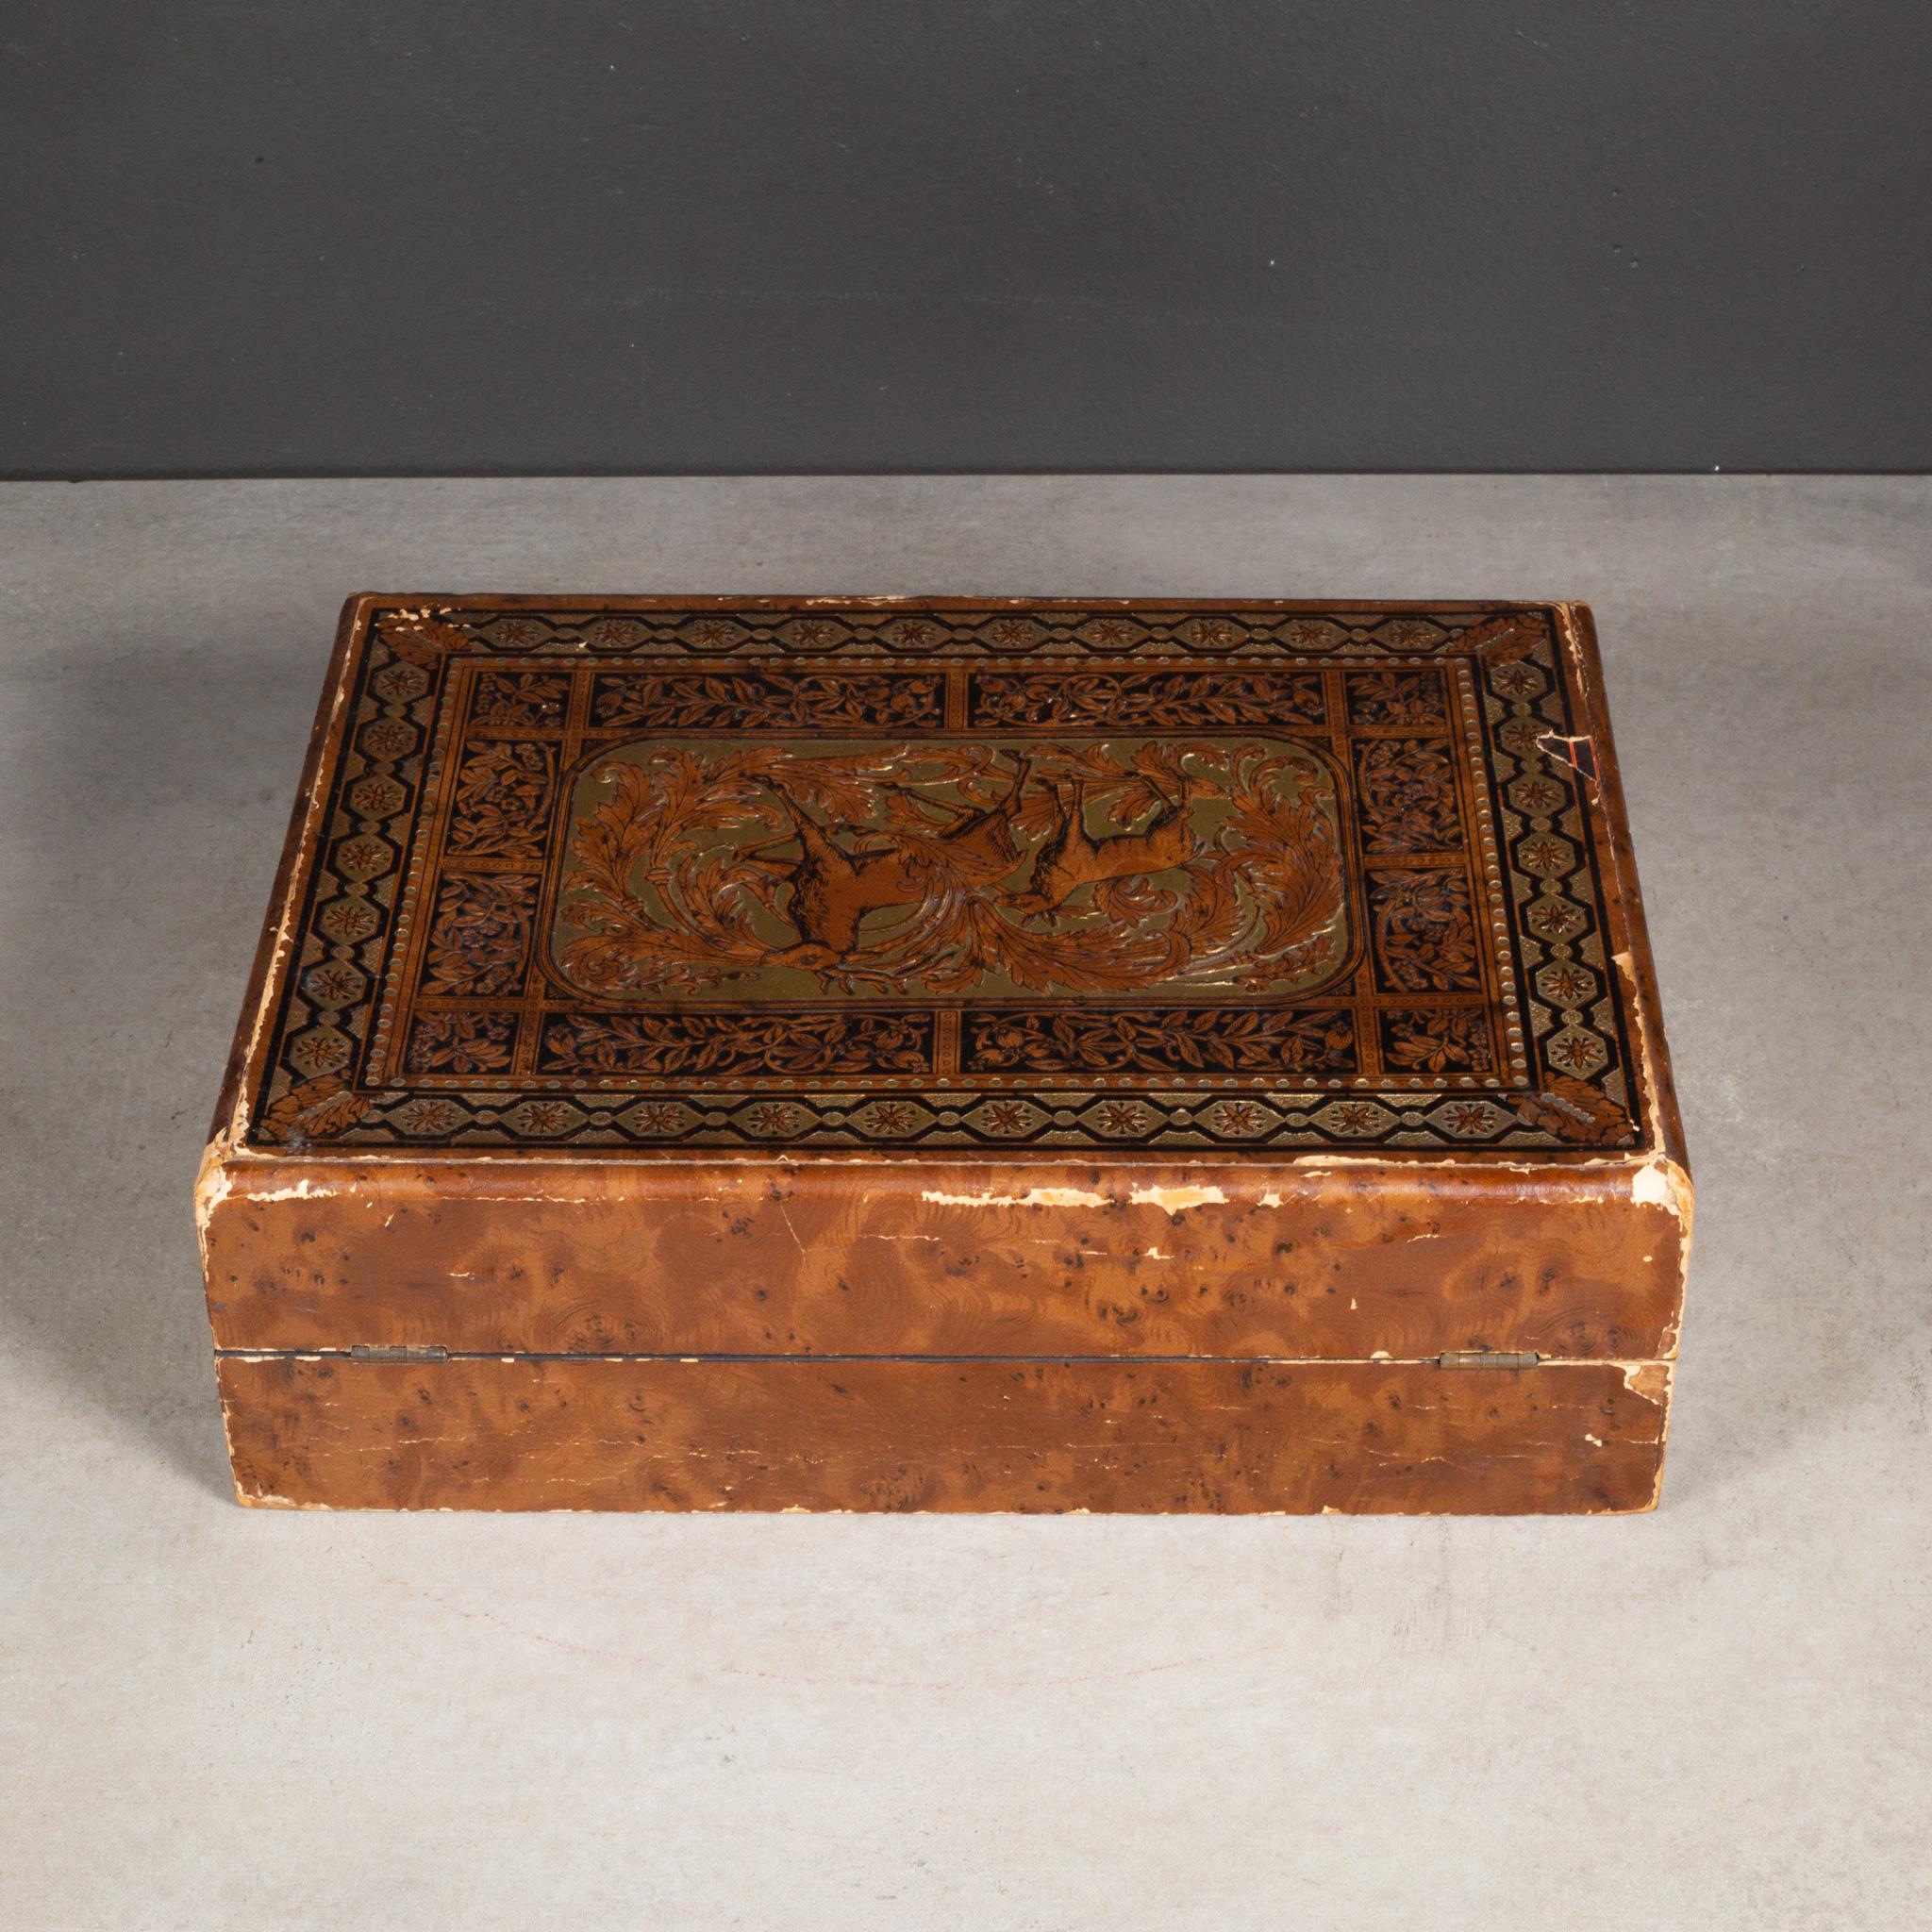 English 19th c. Embossed and Gilded Lap Desk For Sale